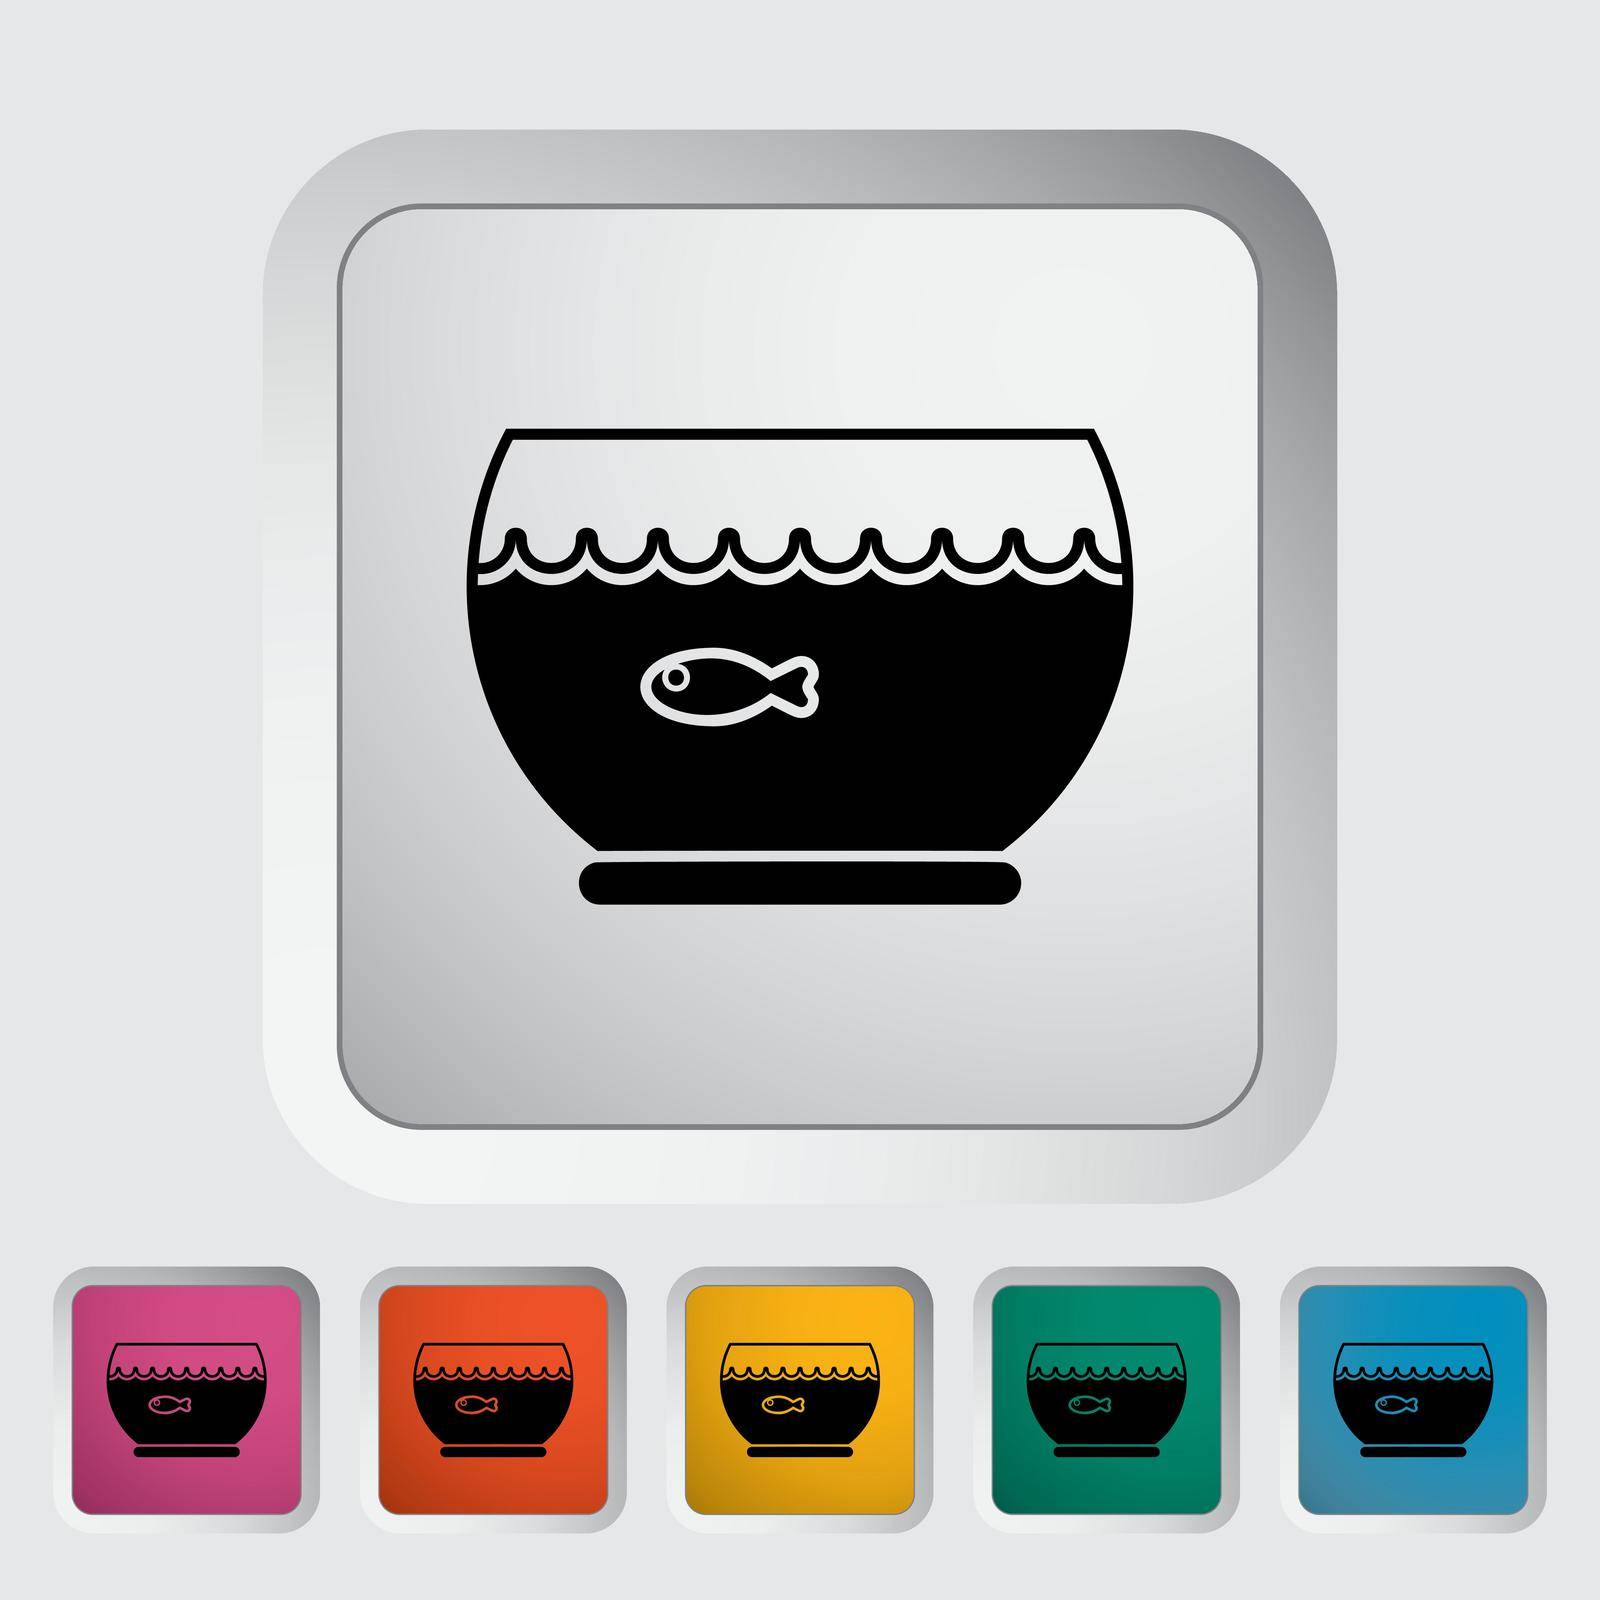 Aquarium icon. Flat vector related icon for web and mobile applications. It can be used as - logo, pictogram, icon, infographic element. Vector Illustration.